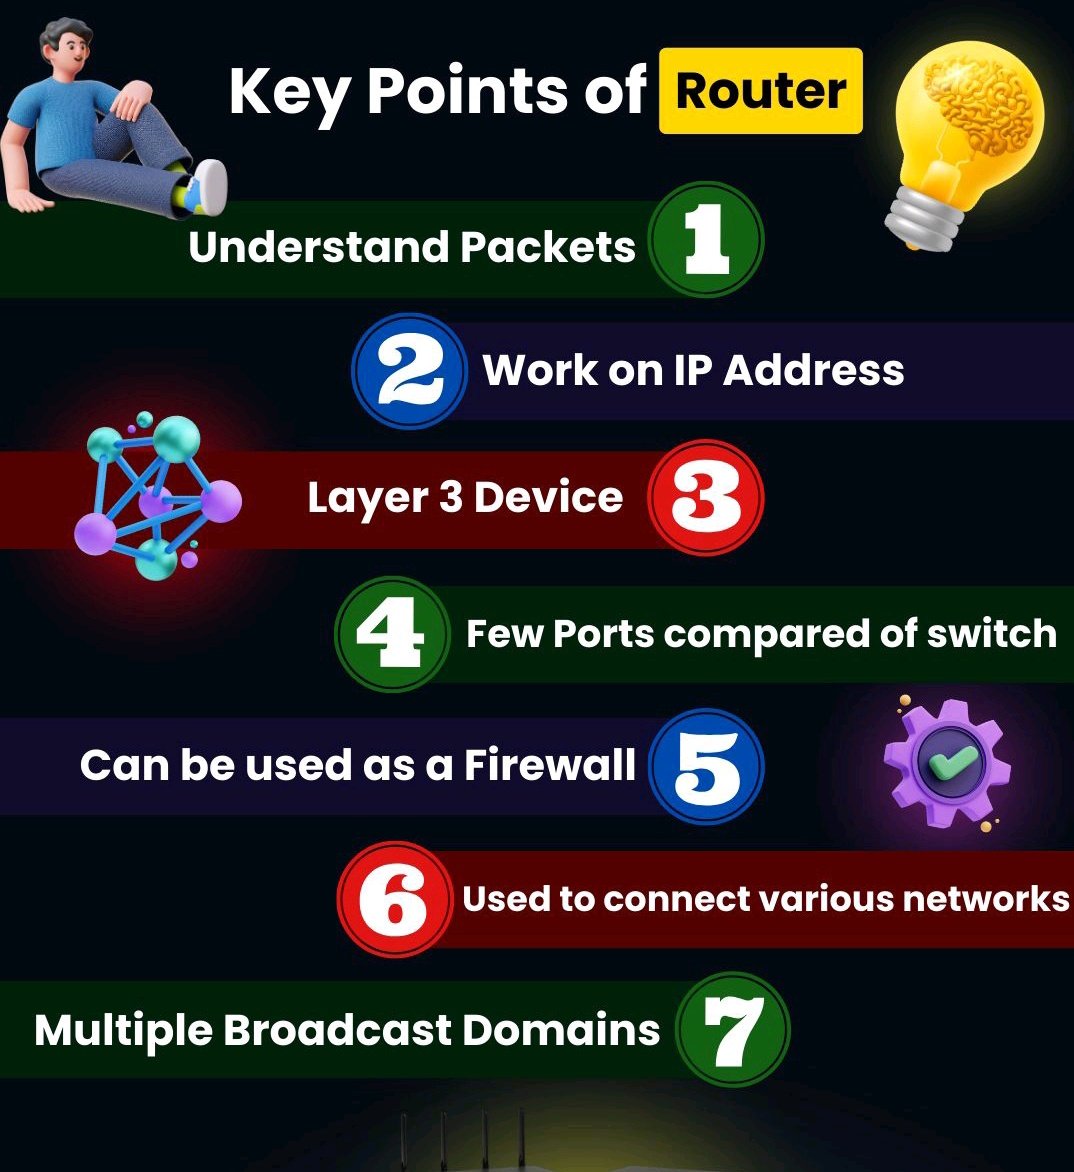 Learn Networking In Simplest Way

Key Point Of Router
#ccnp
#ccna
#ccie
#networkengineer
#juniper
#cisco